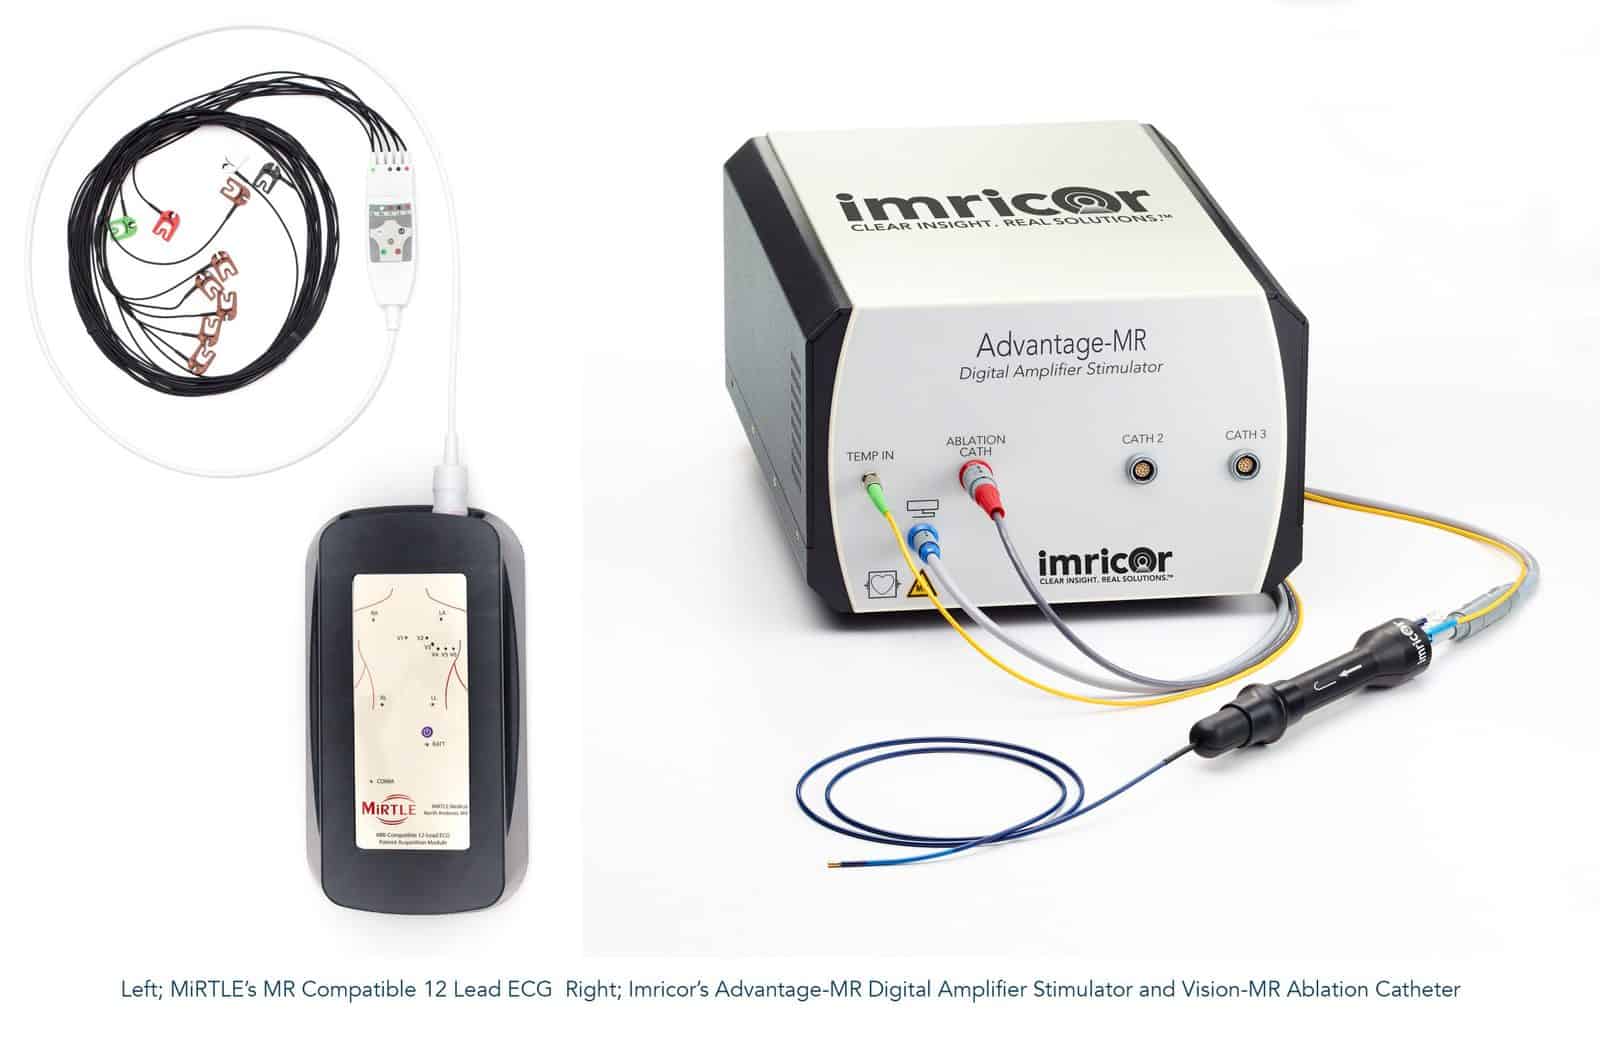 Imricor & MiRTLE Medical Announce Joint Development Agreement to Deliver 12 Lead ECG for MR-guided Cardiac Ablations